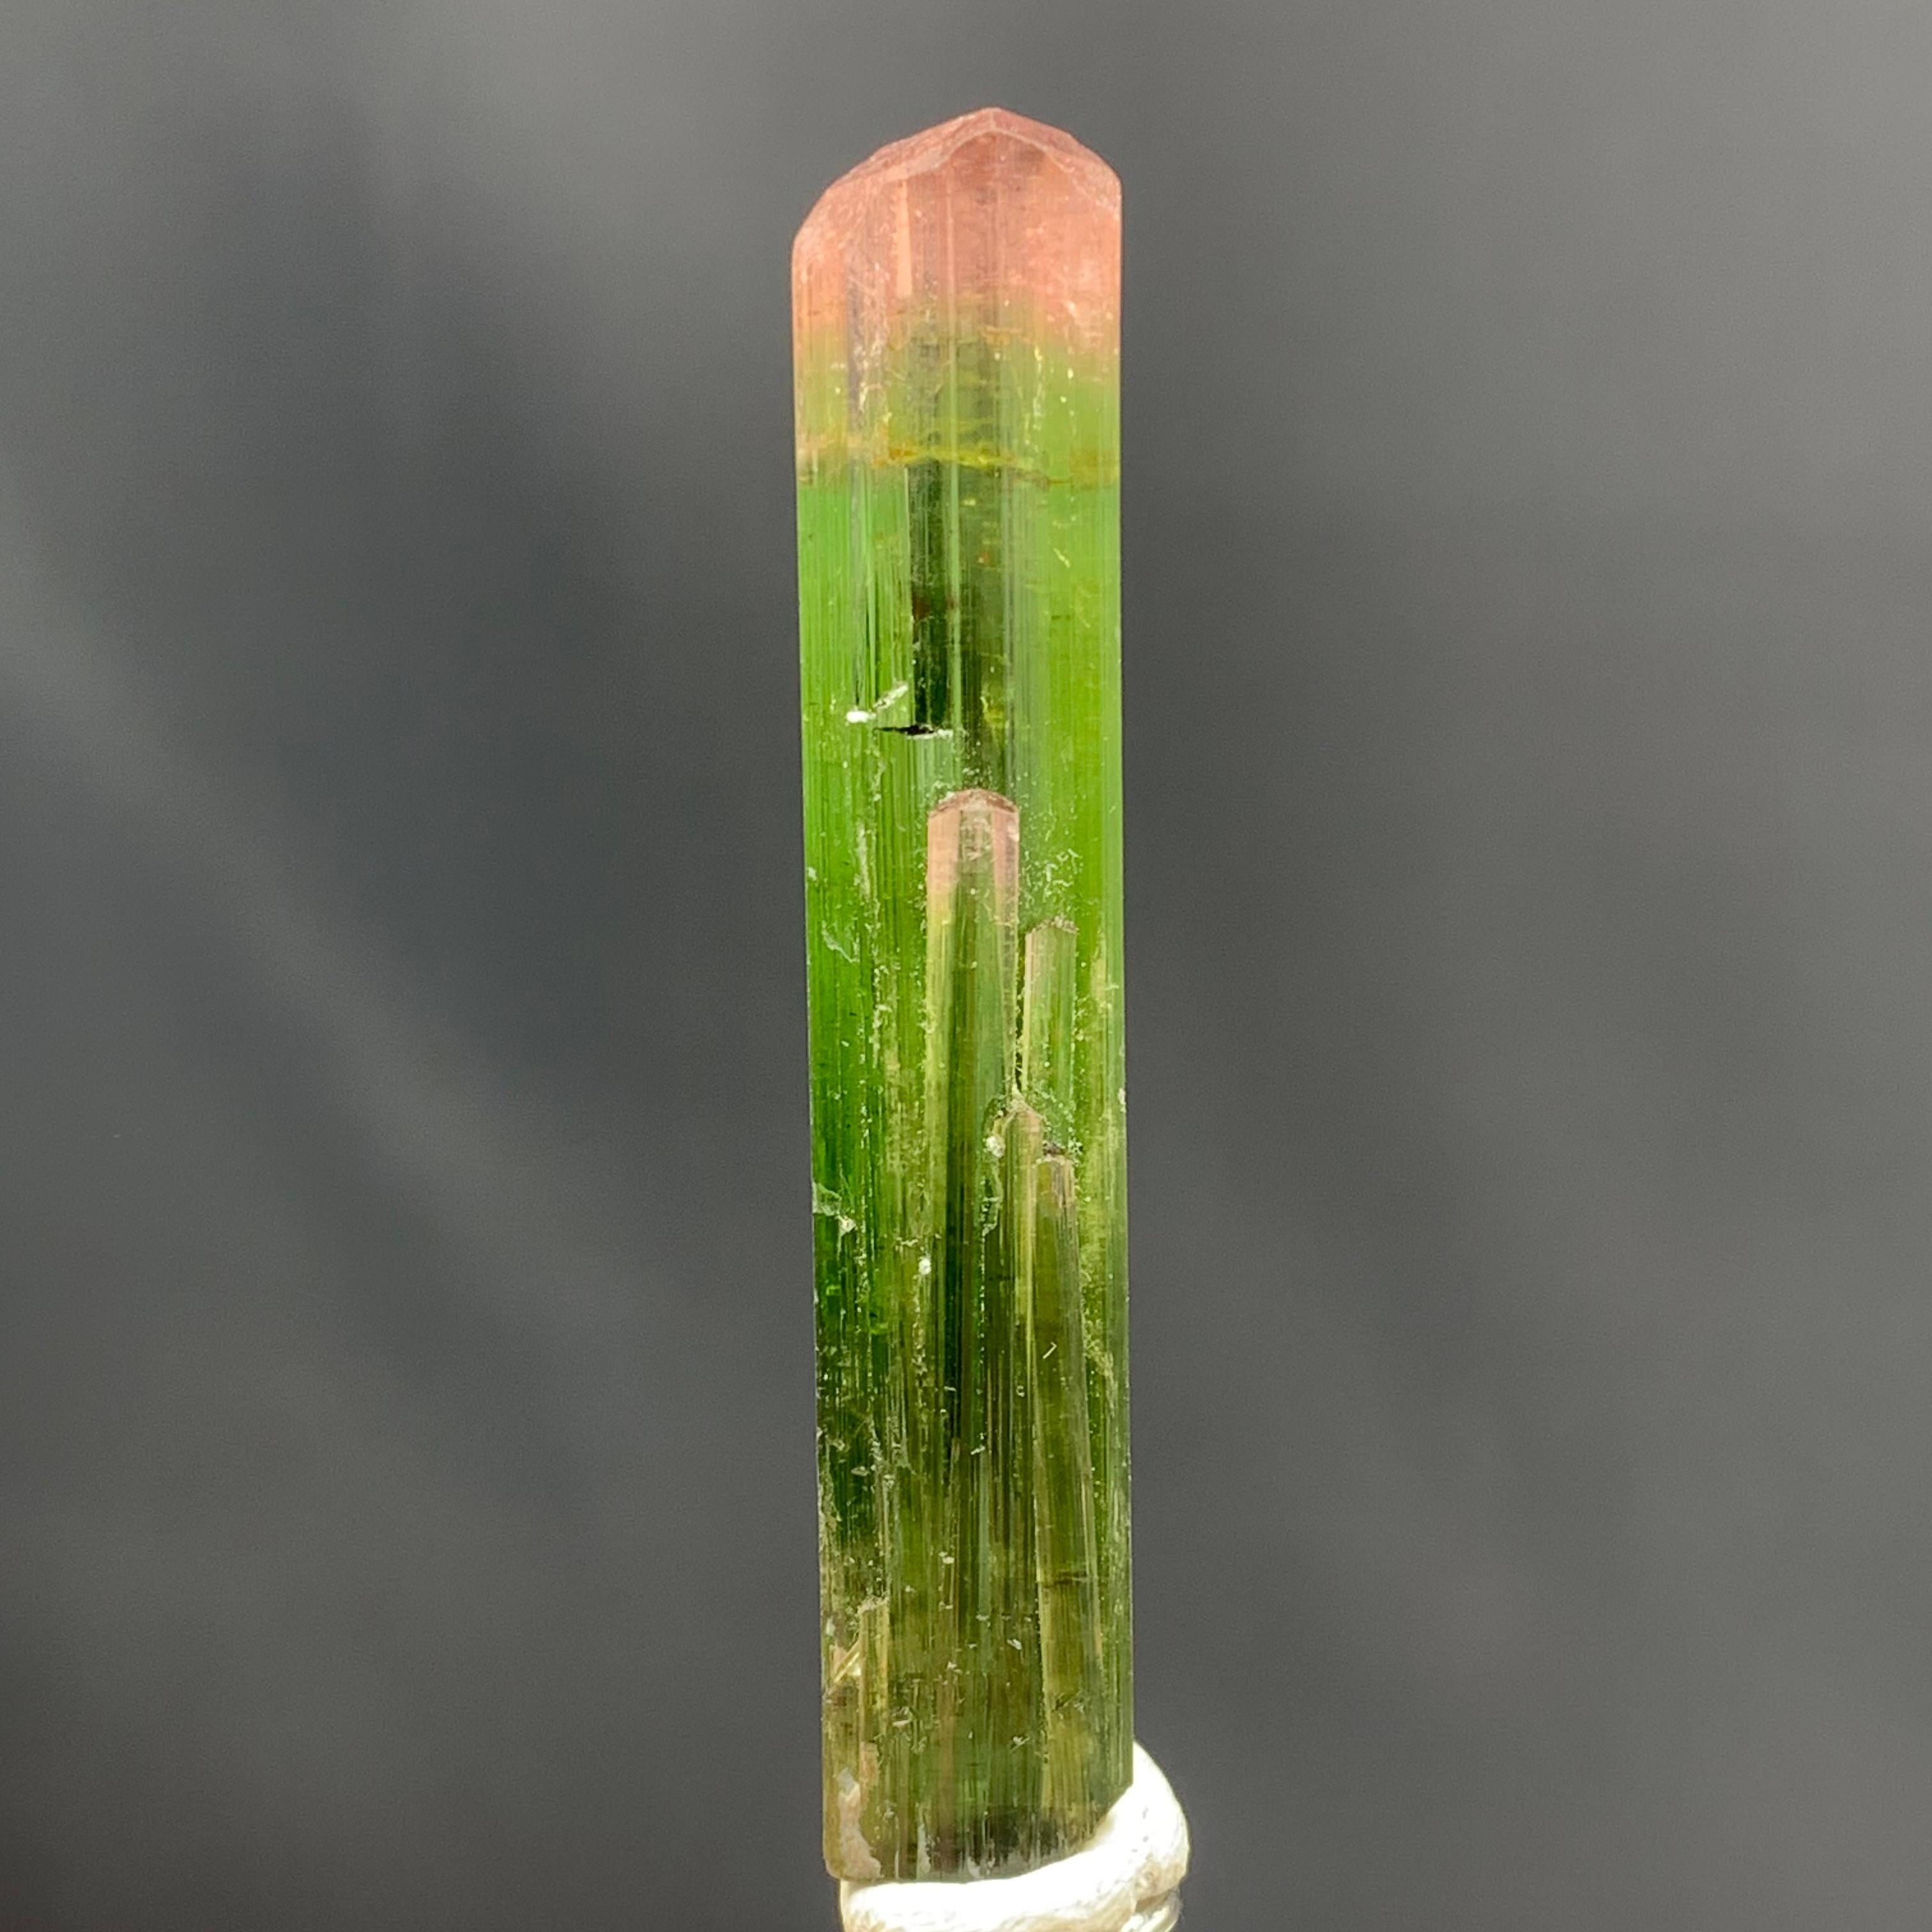 Gorgeous 53.65 Carat Bi Color Tourmaline Crystal From Paprok Mine Afghanistan For Sale 2